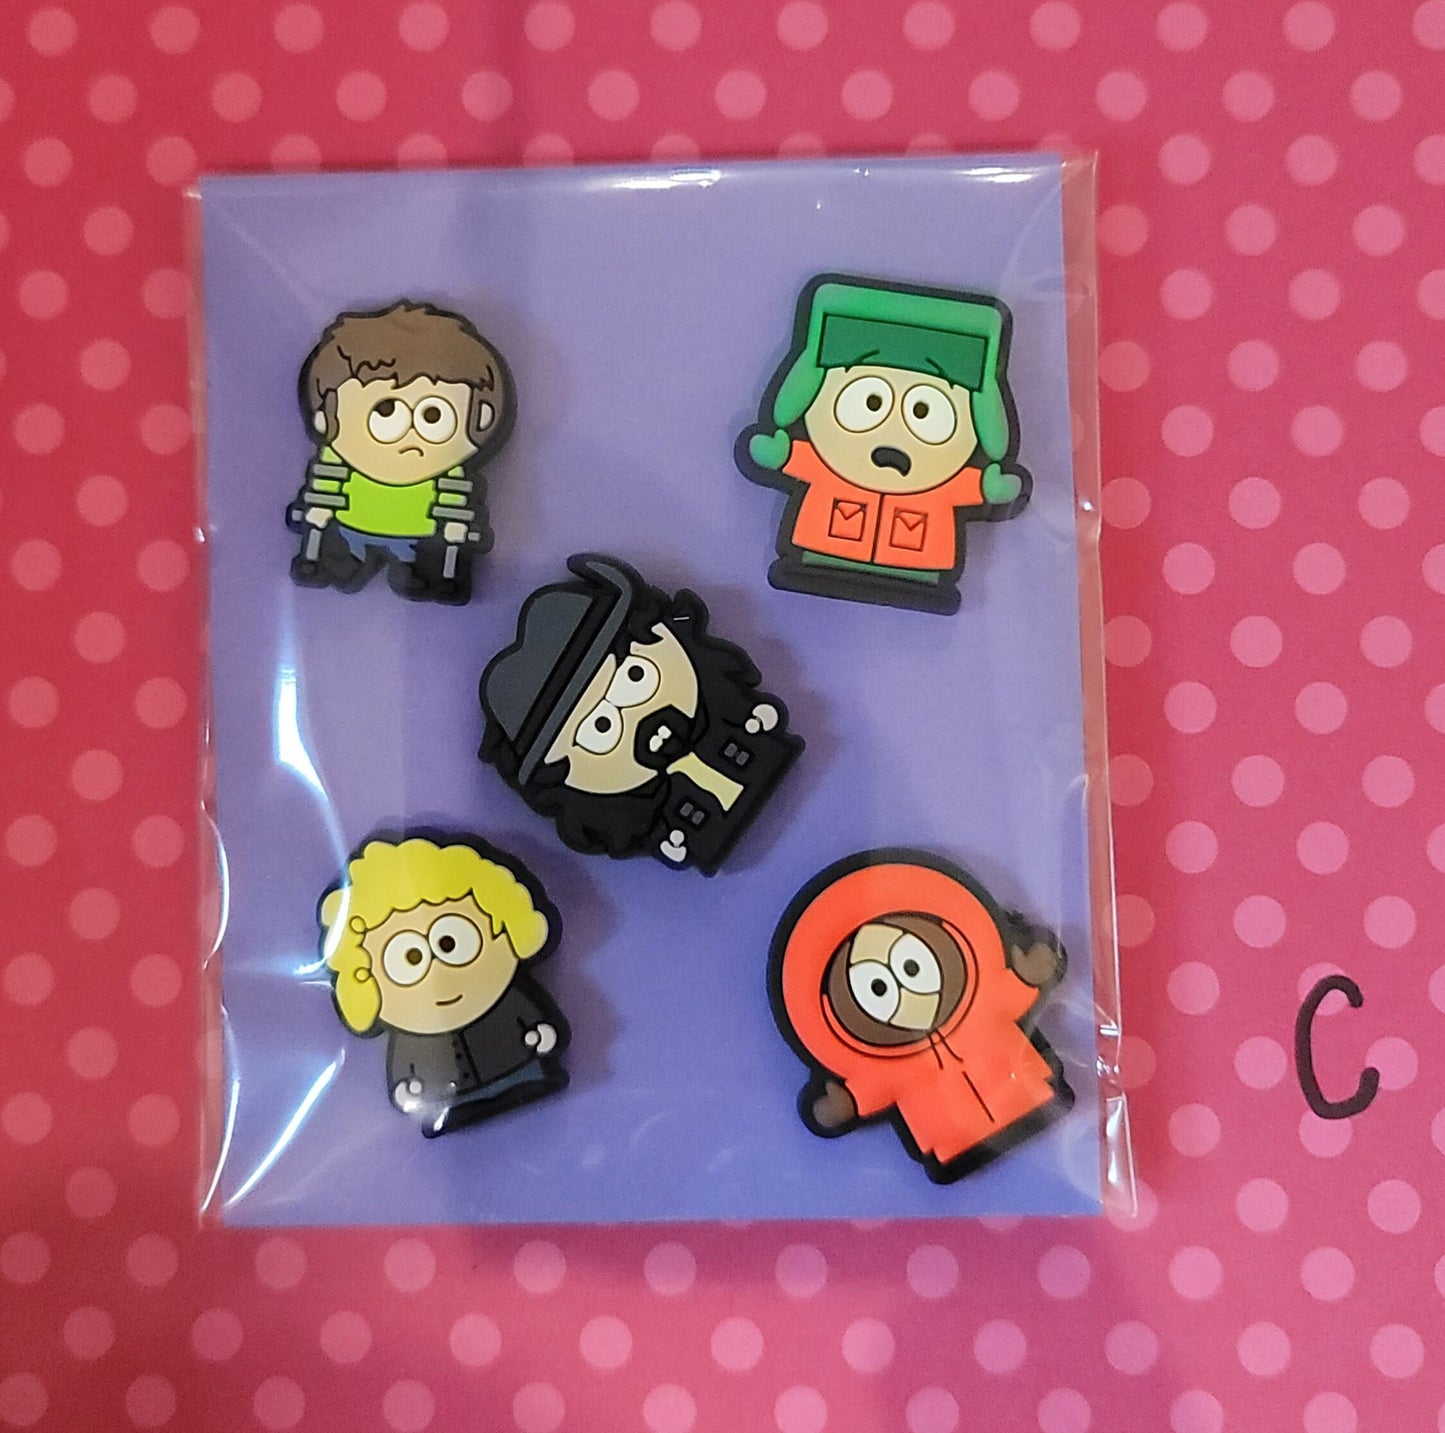 South Park Inspired Croc Charms, South Park Inspired Shoe Charms, Jibbitz, Shoe Accessories, Shoe Charms